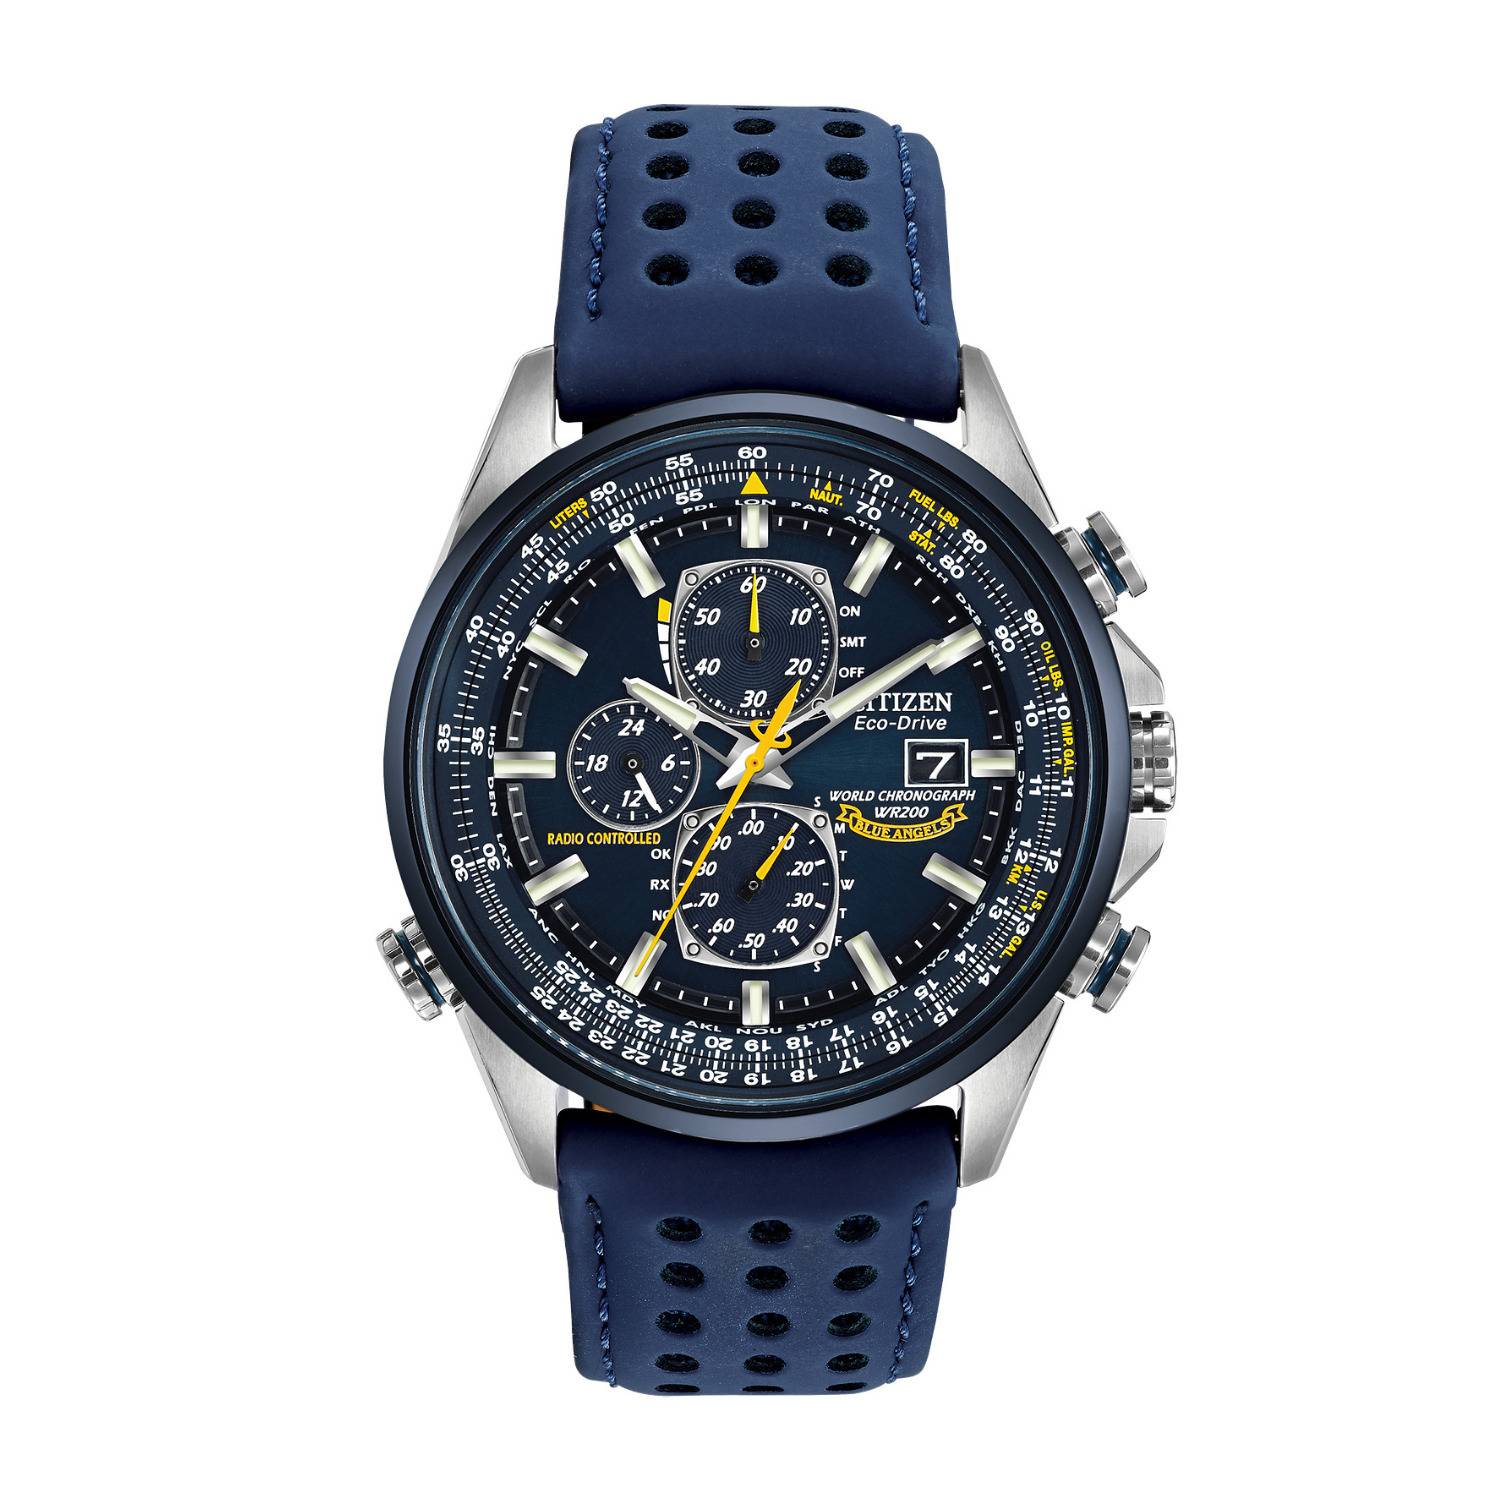 Citizen AT8020-03L Men's Eco-Drive Blue Angels World Chronograph Atomic Timekeeping Watch with Day/Date